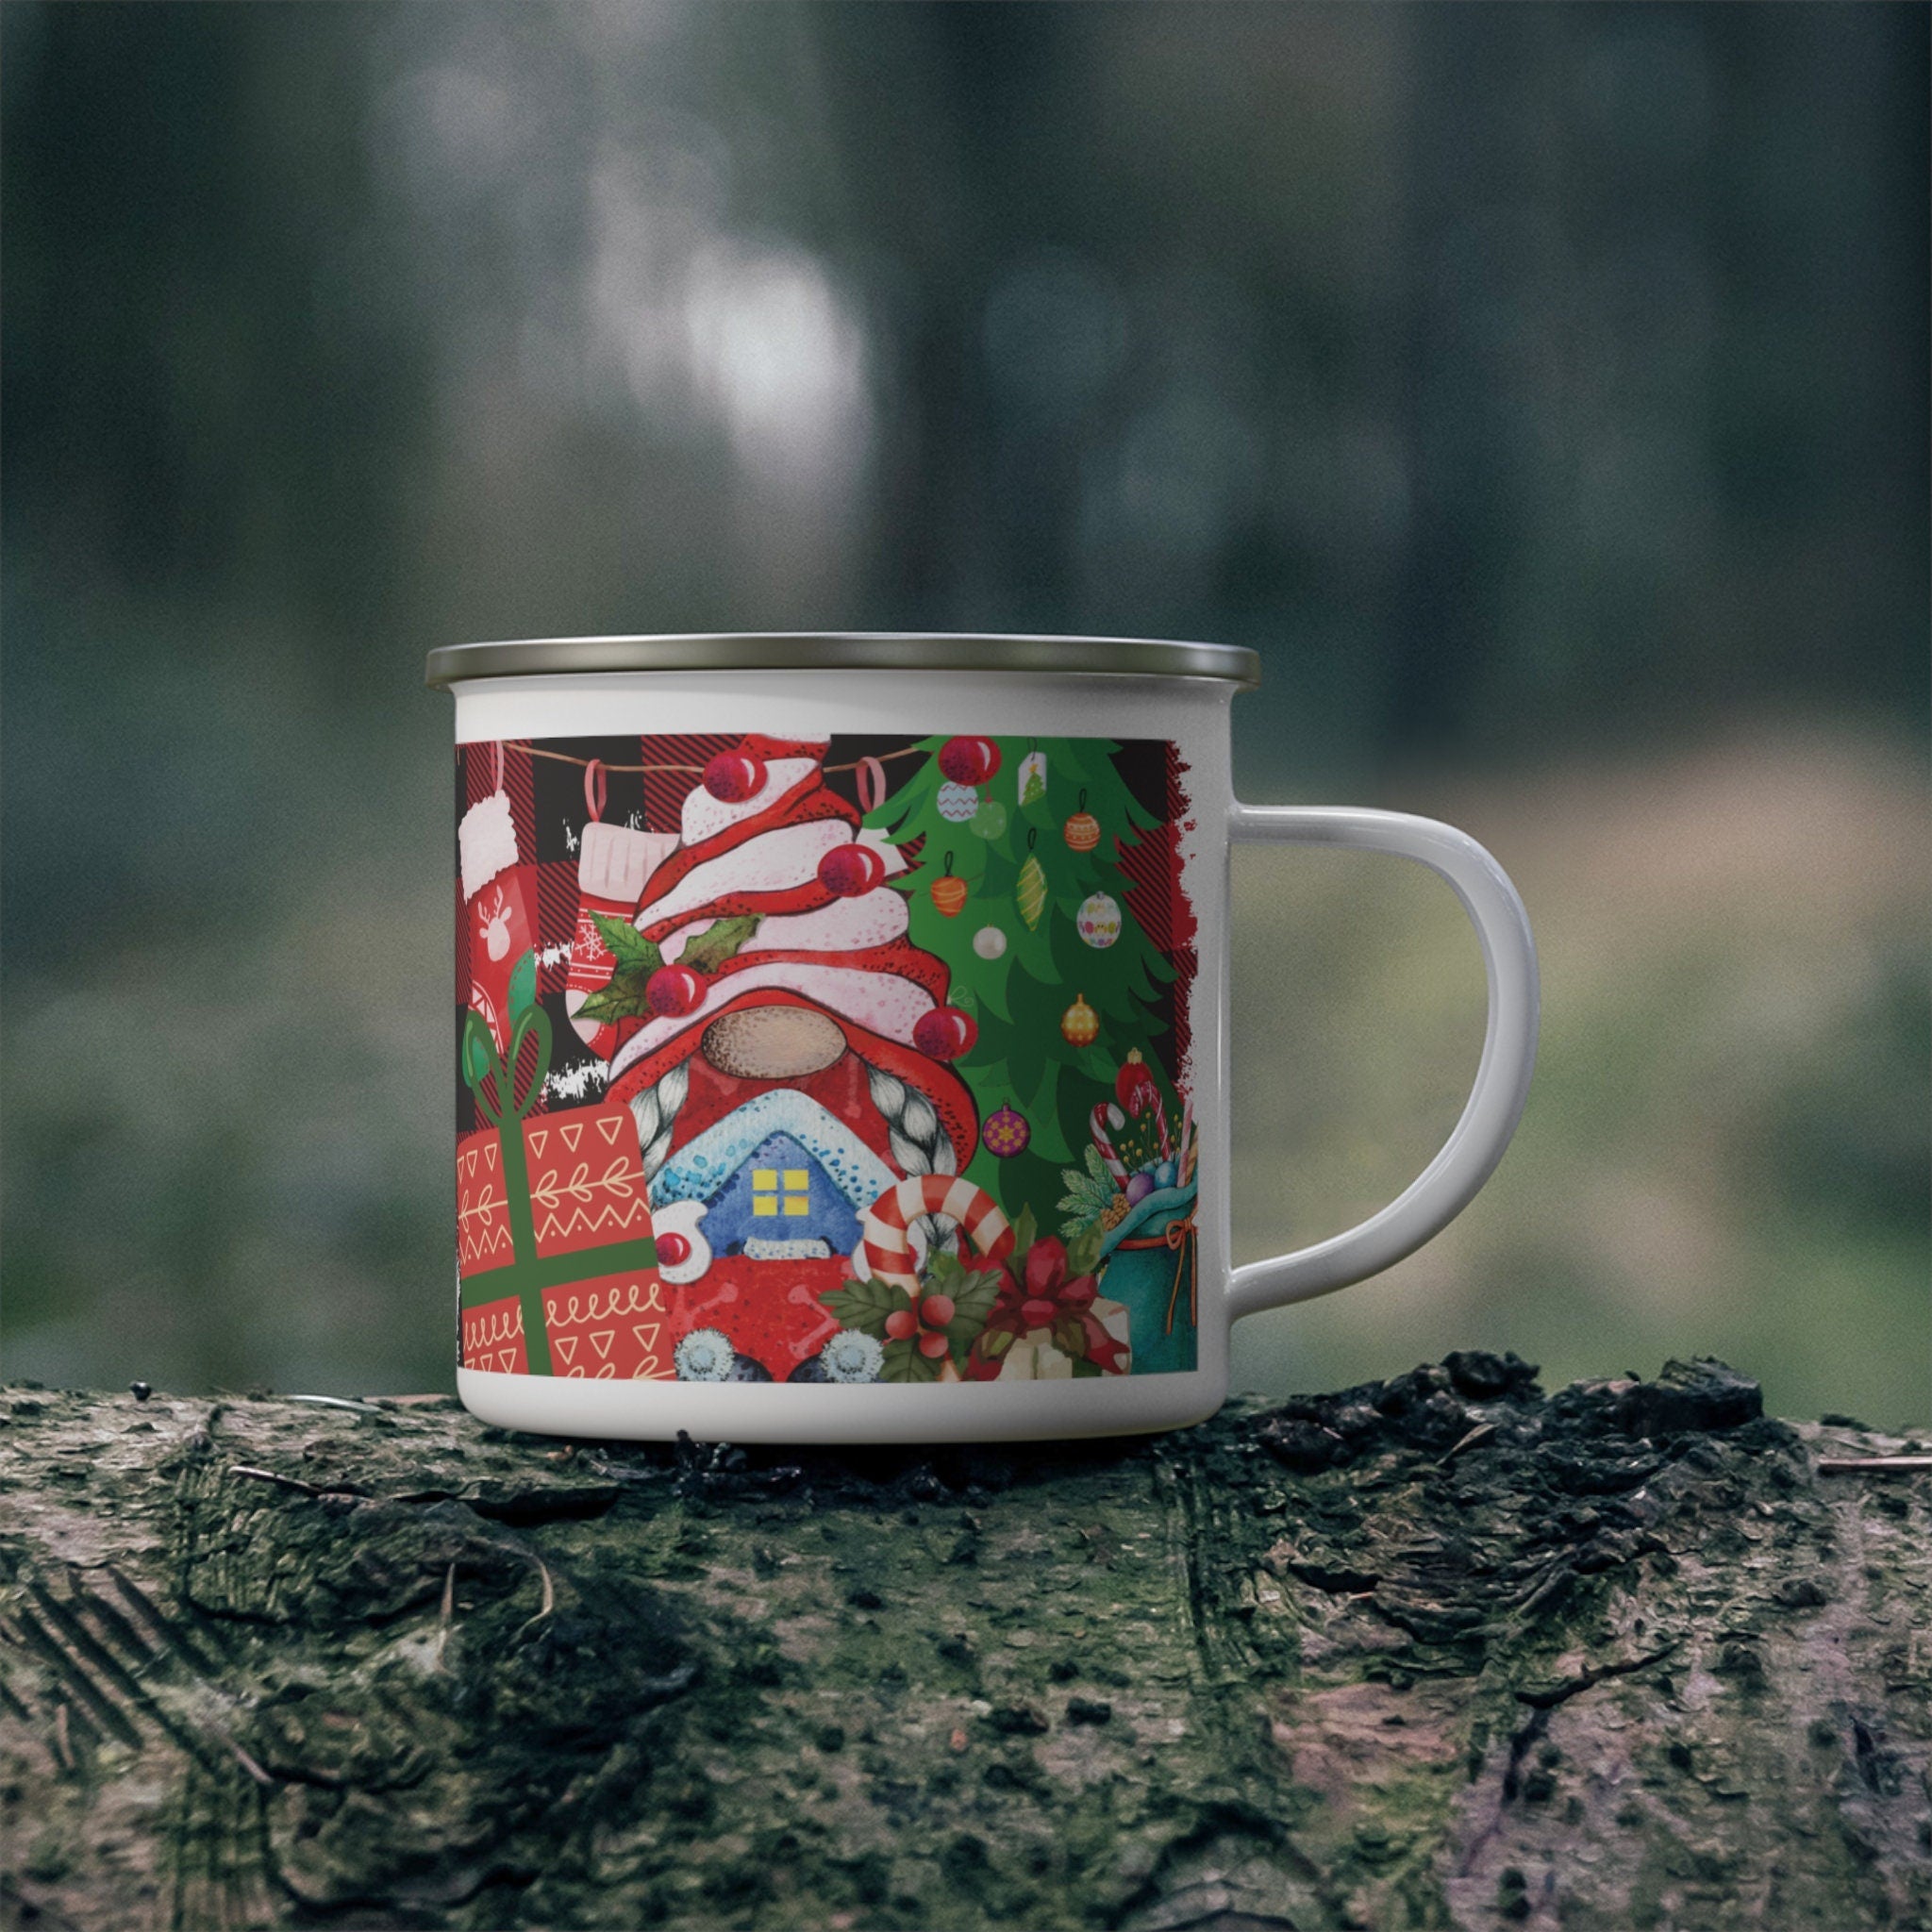 Charming Enamel Gnome Mug: Whimsical Christmas Decor for Cozy Mornings. Embrace the Holiday Spirit with Every Sip!